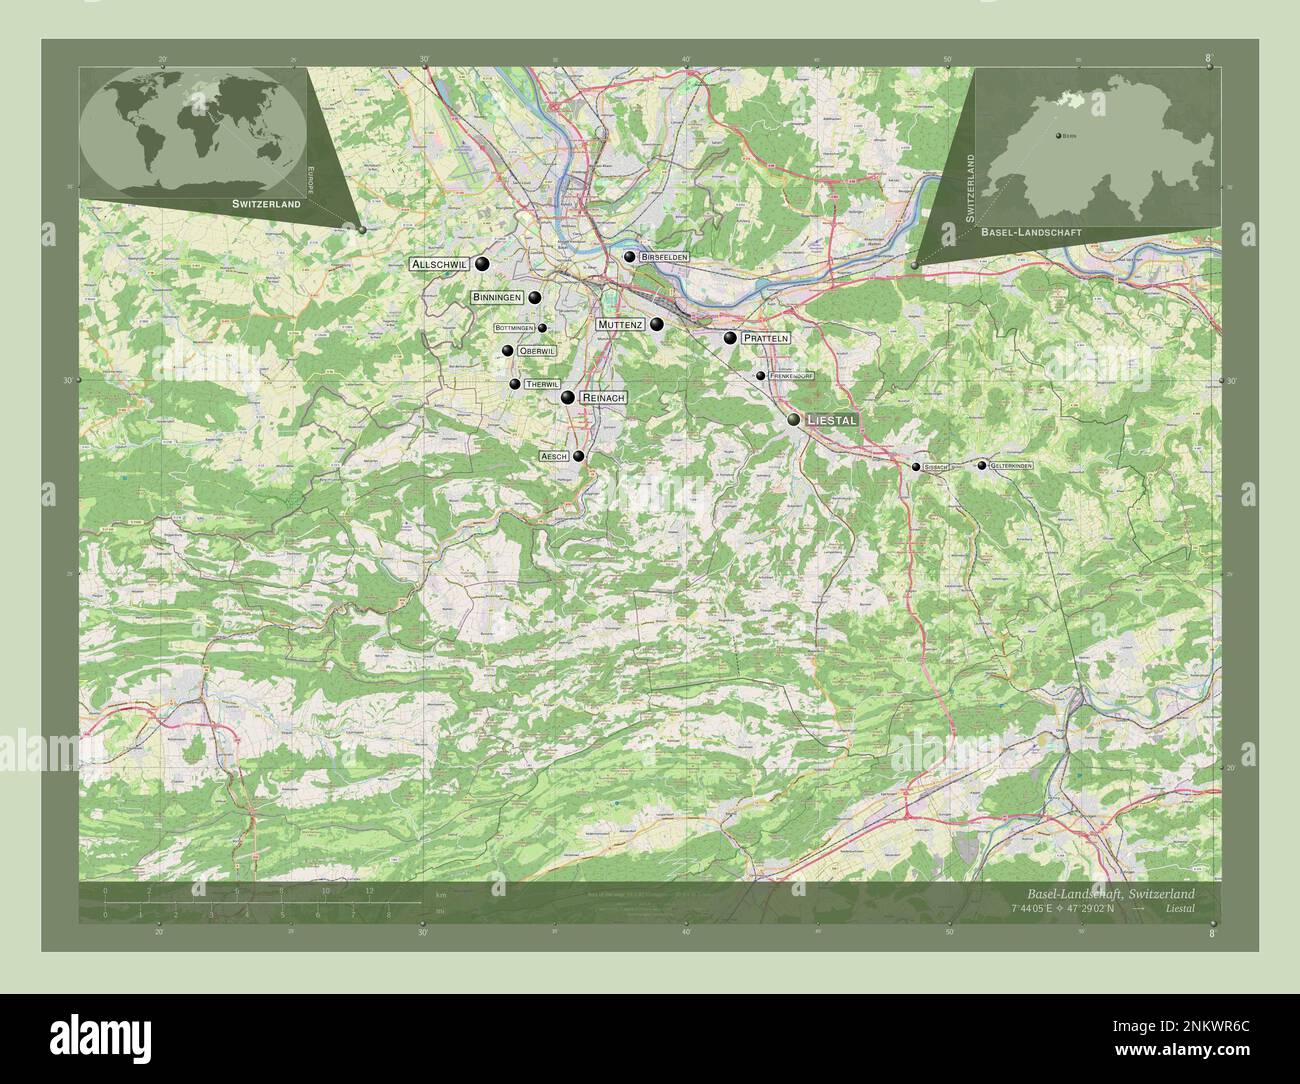 Basel-Landschaft, canton of Switzerland. Open Street Map. Locations and names of major cities of the region. Corner auxiliary location maps Stock Photo